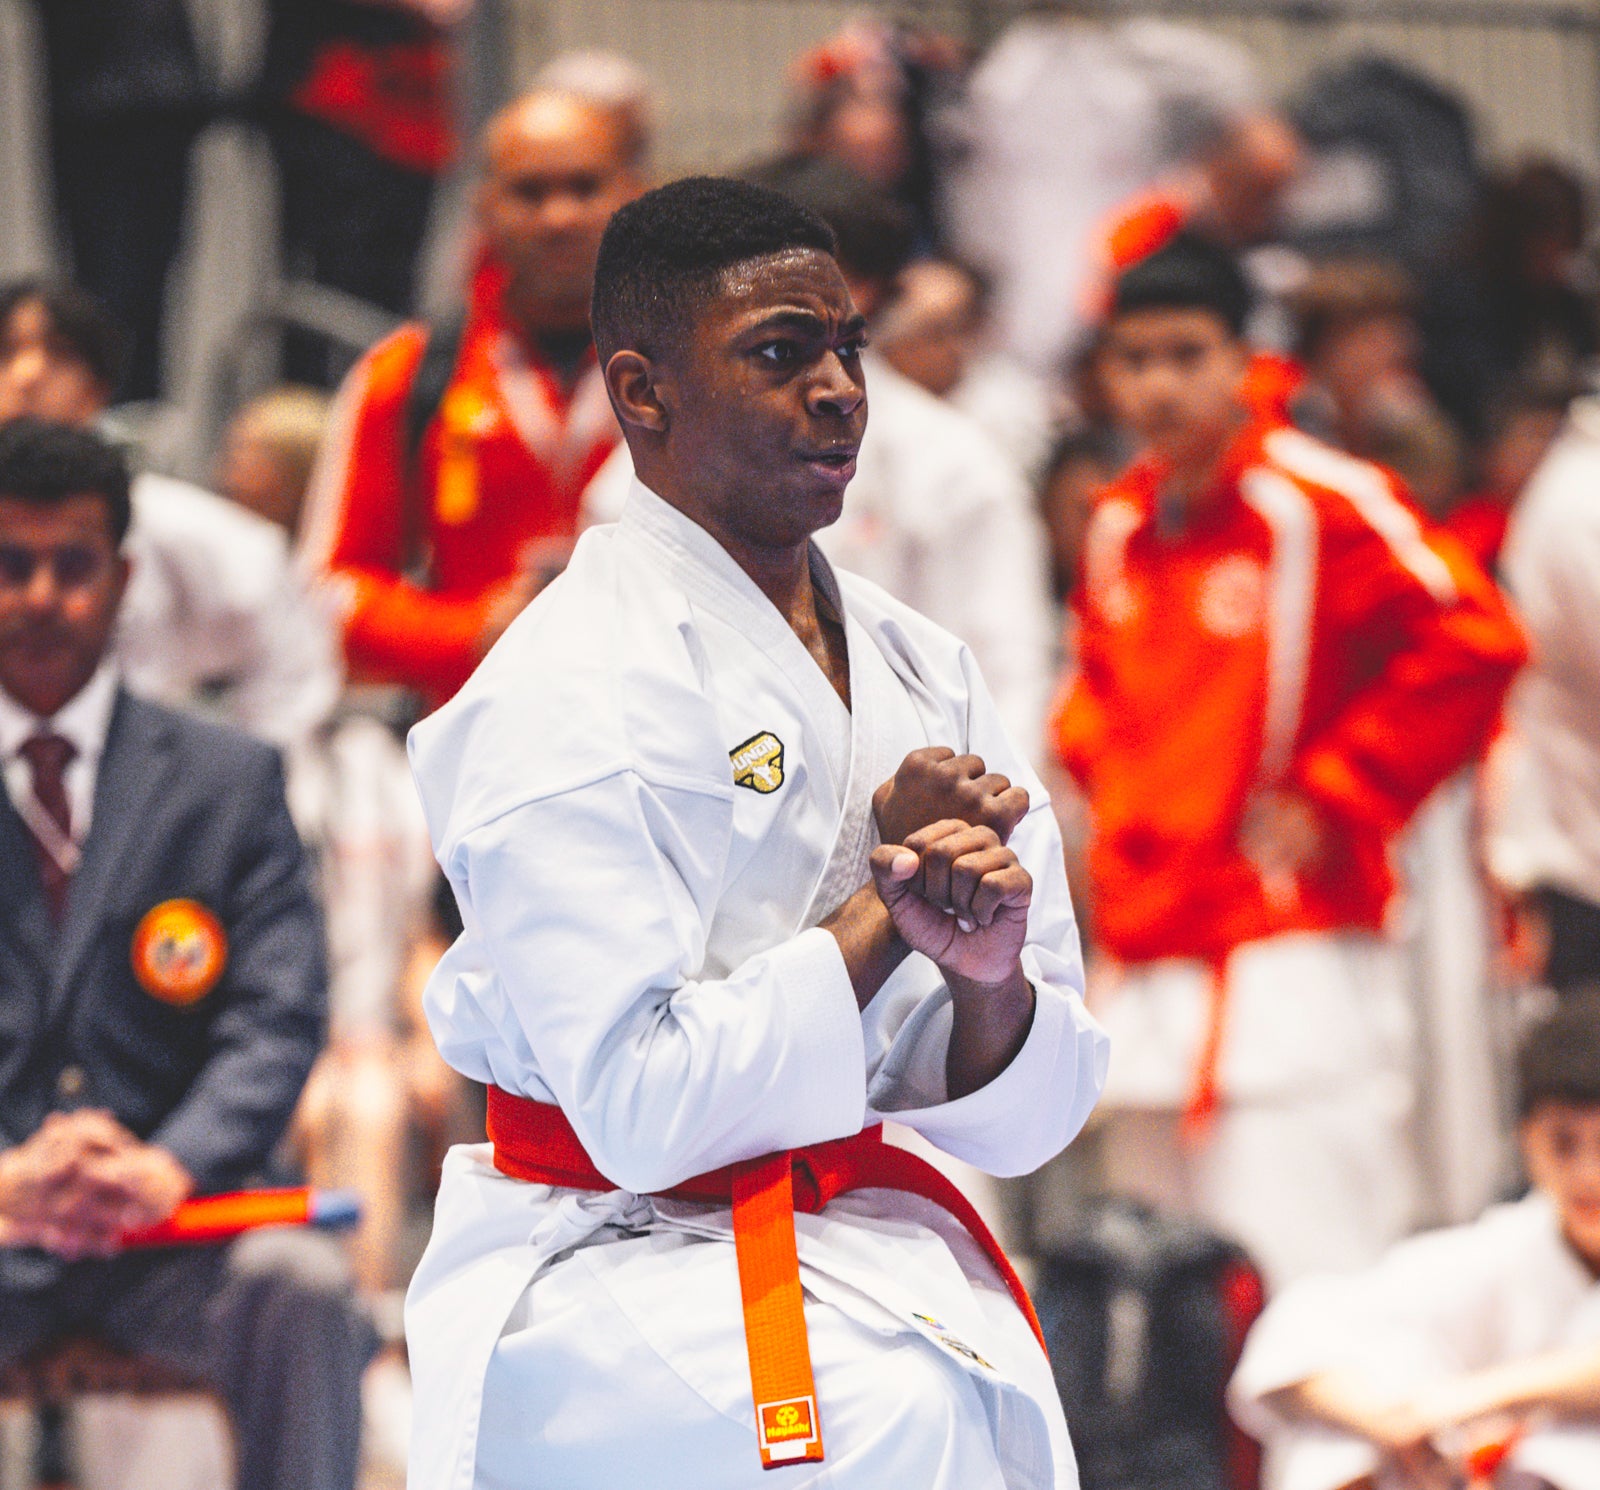 martial artist competing